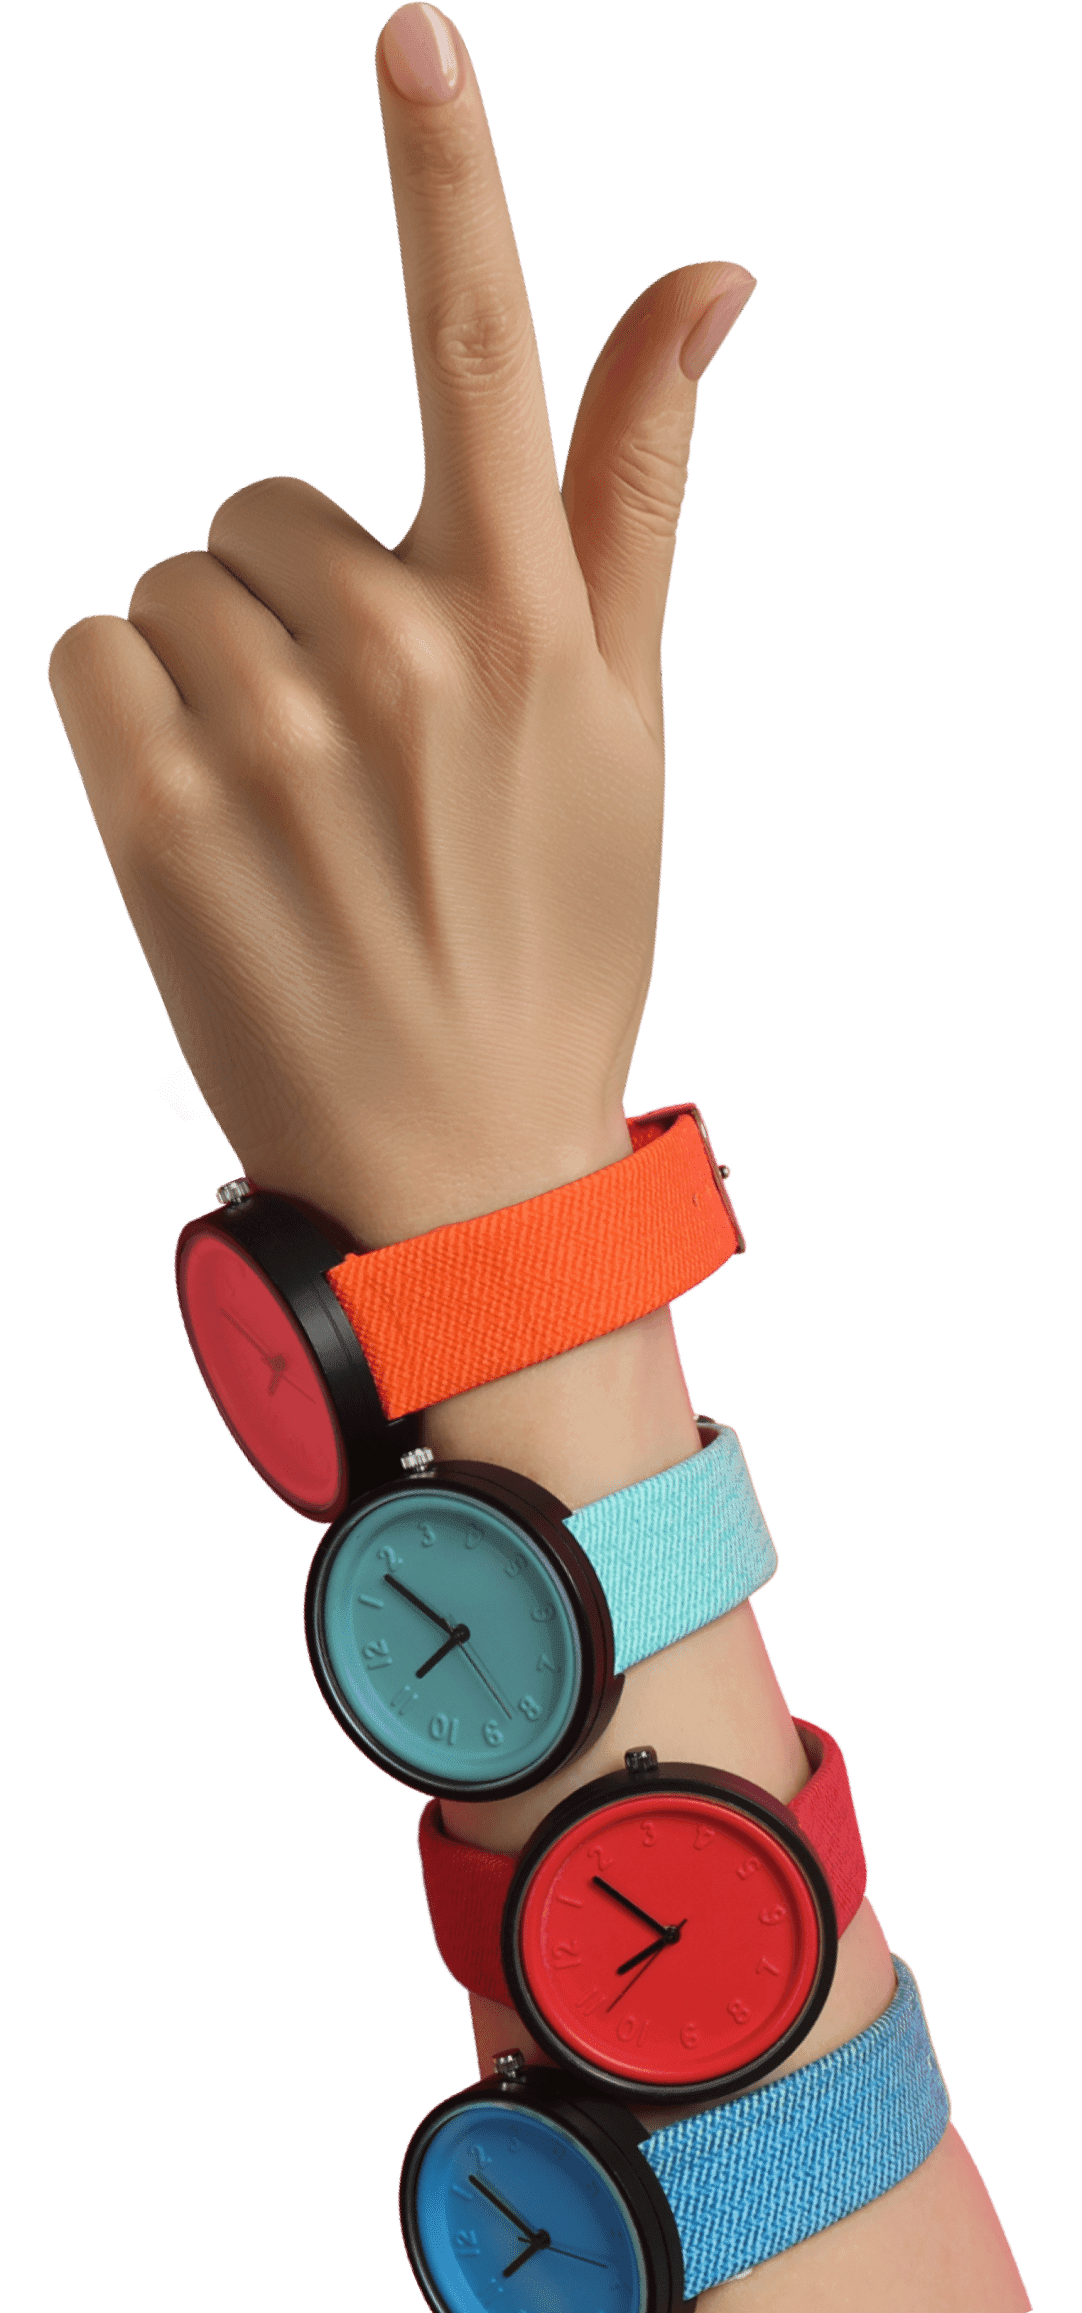 A hand with the index finger pointing up and three orange, teal, and red wristwatches on.